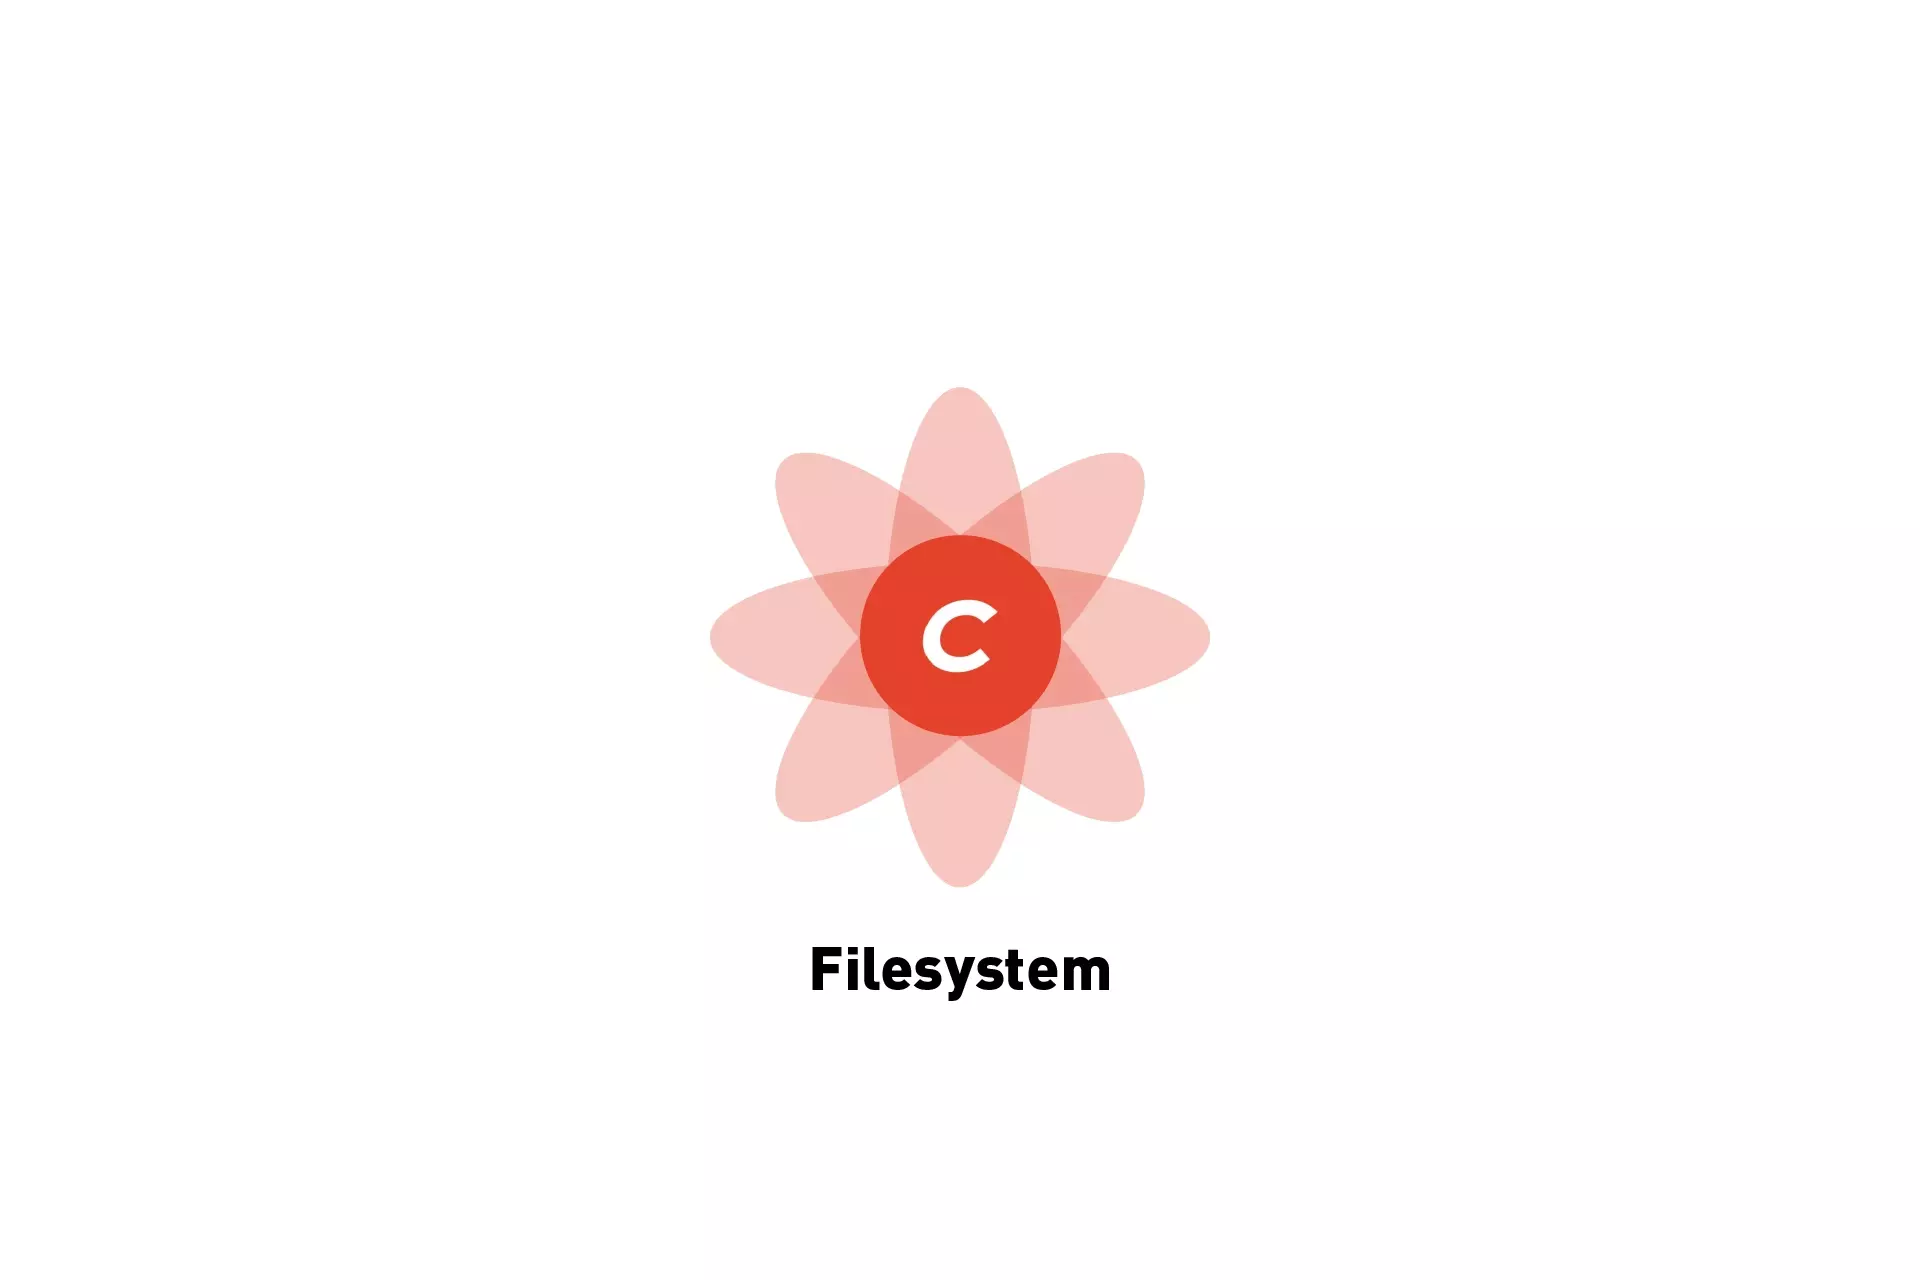 A flower that represents Craft CMS with the text "Filesystem" beneath it.